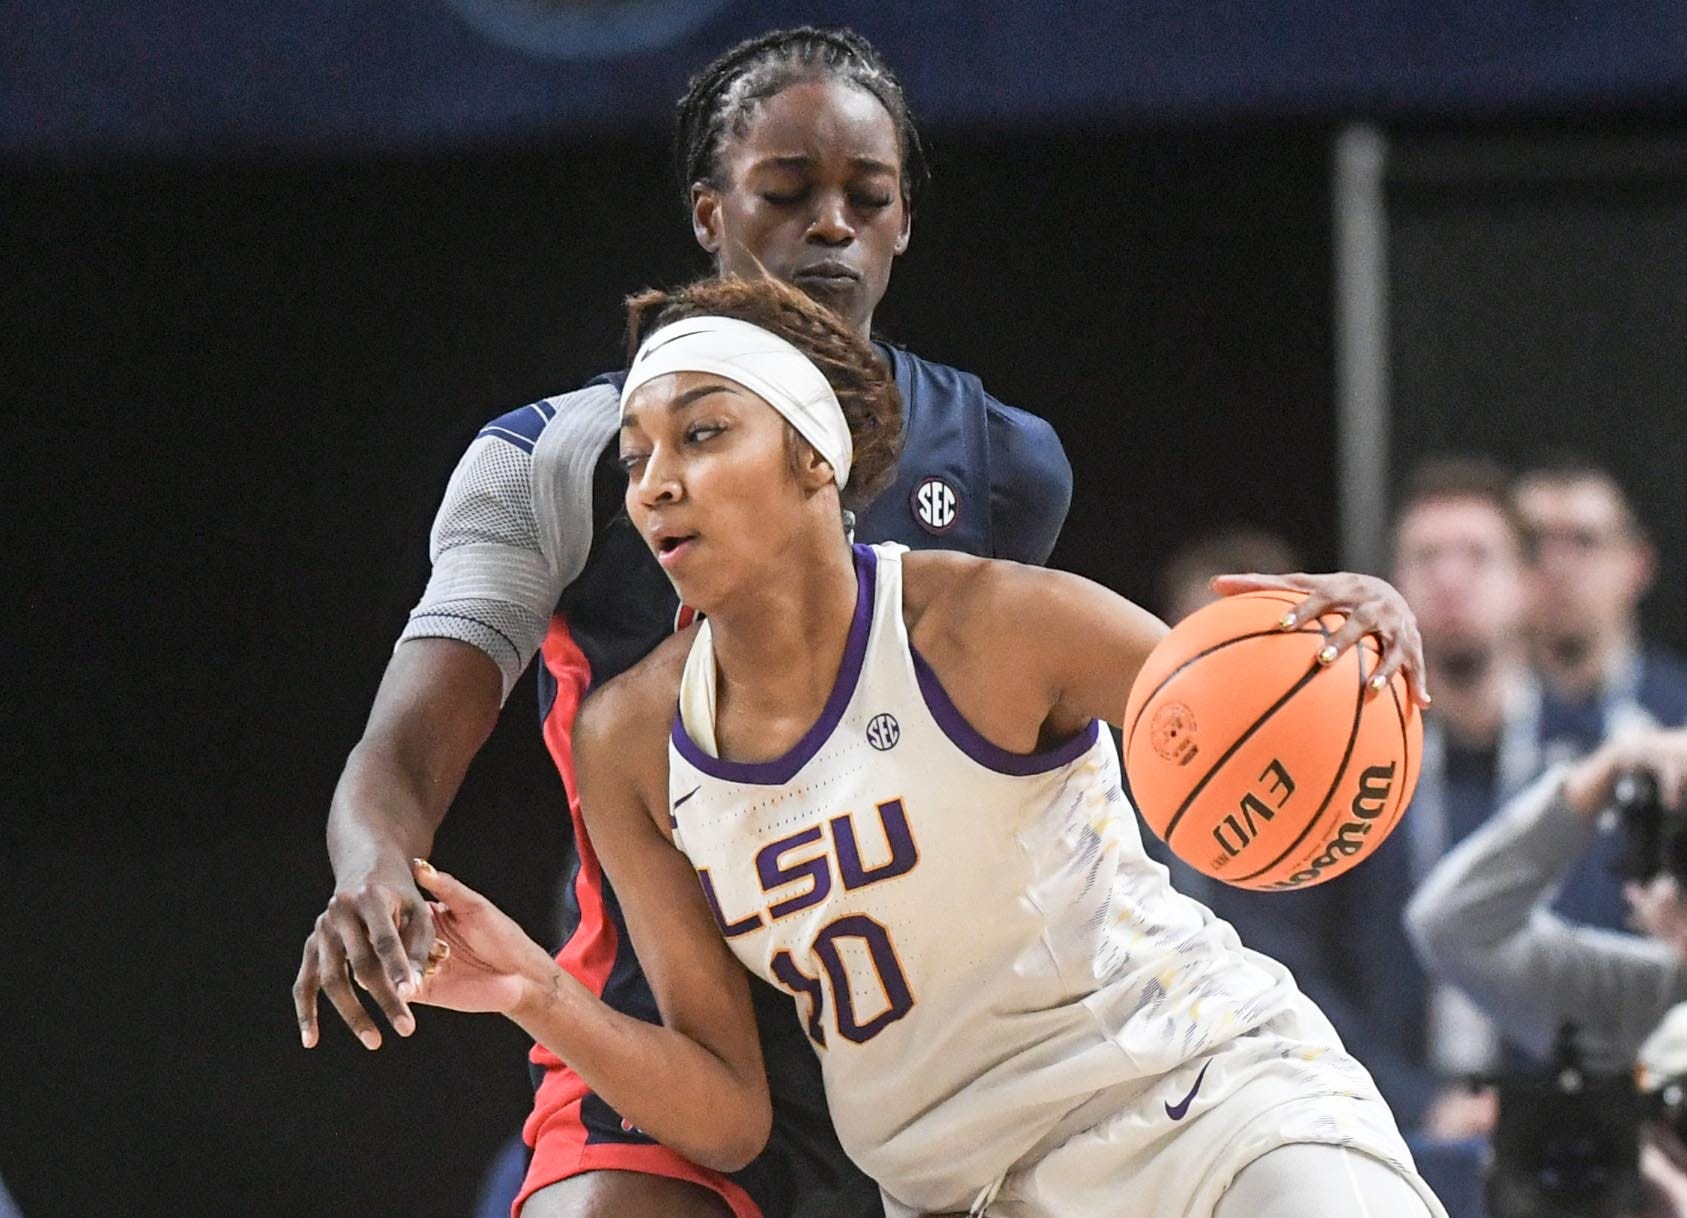 Louisiana State University forward Angel Reese (10) dribbles near Ole Miss forward Tyra Singleton (22) during the fourth quarter of the SEC Women's Basketball Tournament game at the Bon Secours Wellness Arena in Greenville, S.C. Saturday, March 9, 2024.